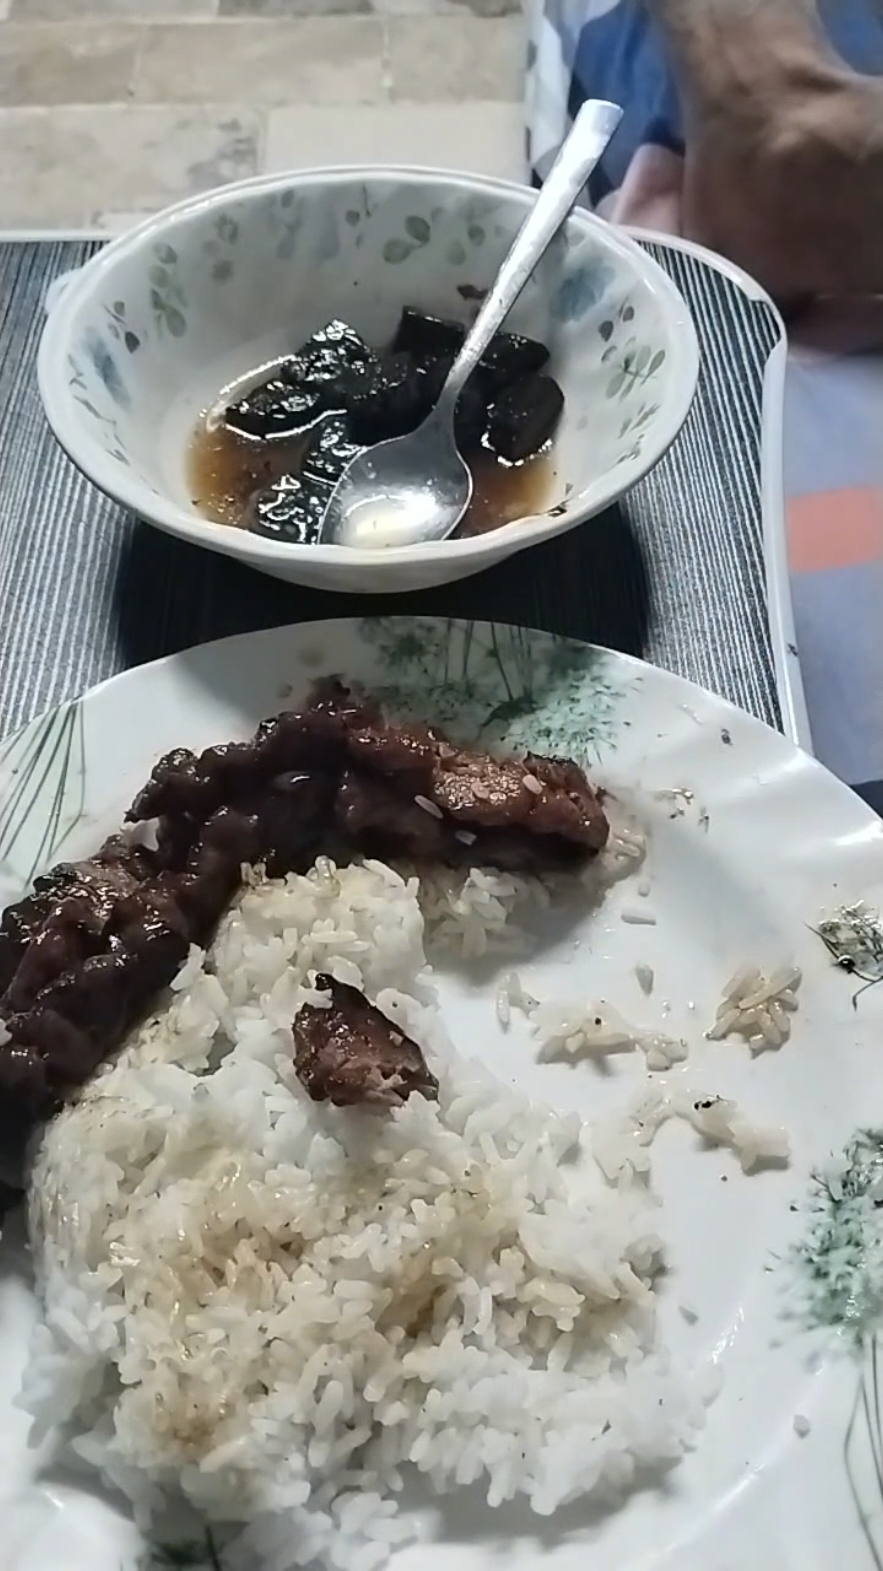 Sarap kumain ng all time favorite #babrbeque kanto style lalo ngayong tag-ulan. #foodtiktok #FoodLover #bbqtiktok #roadto100kfollowers🎊🥰 #fyppppppppppppppppppppppp #fypシ 